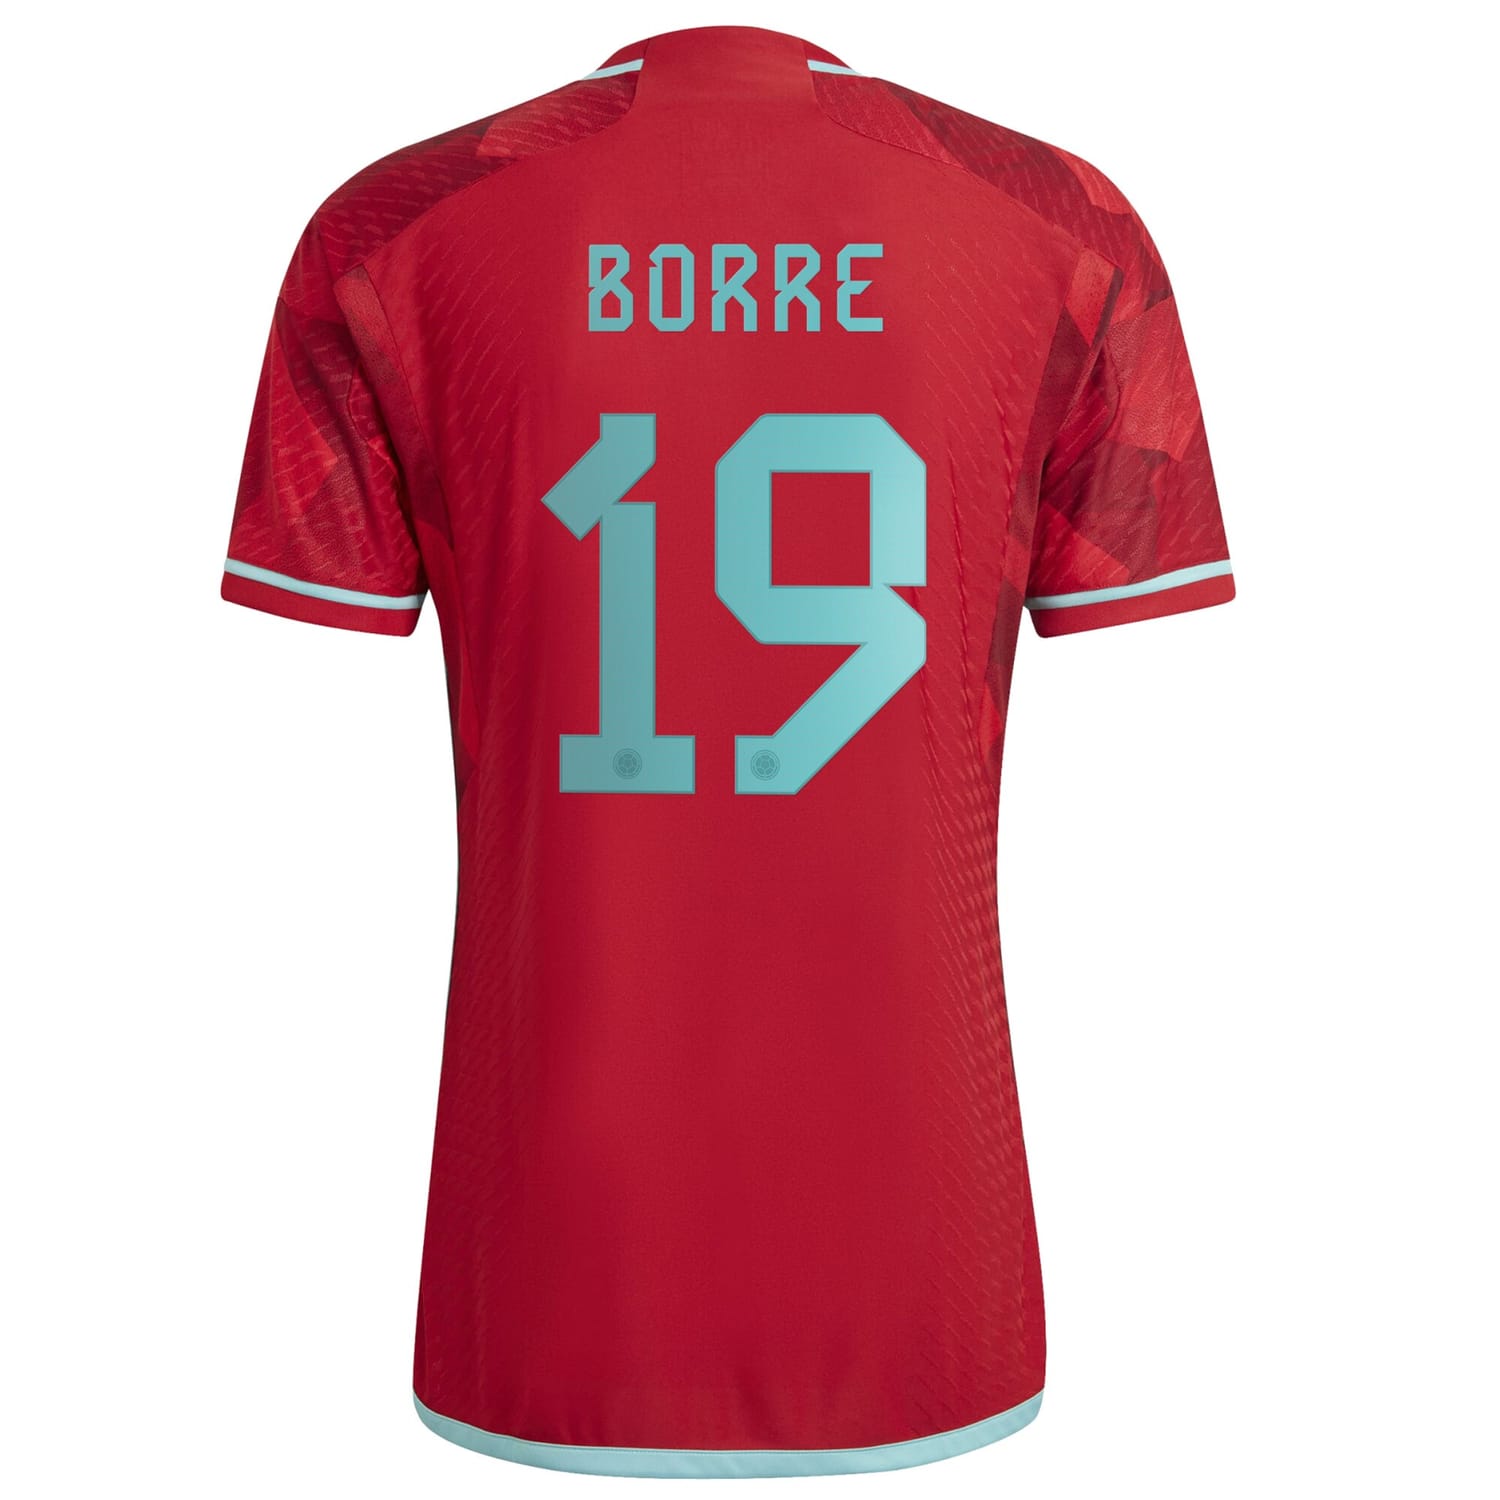 Colombia National Team Away Authentic Jersey Shirt Red 2022-23 player Rafael Borré printing for Men